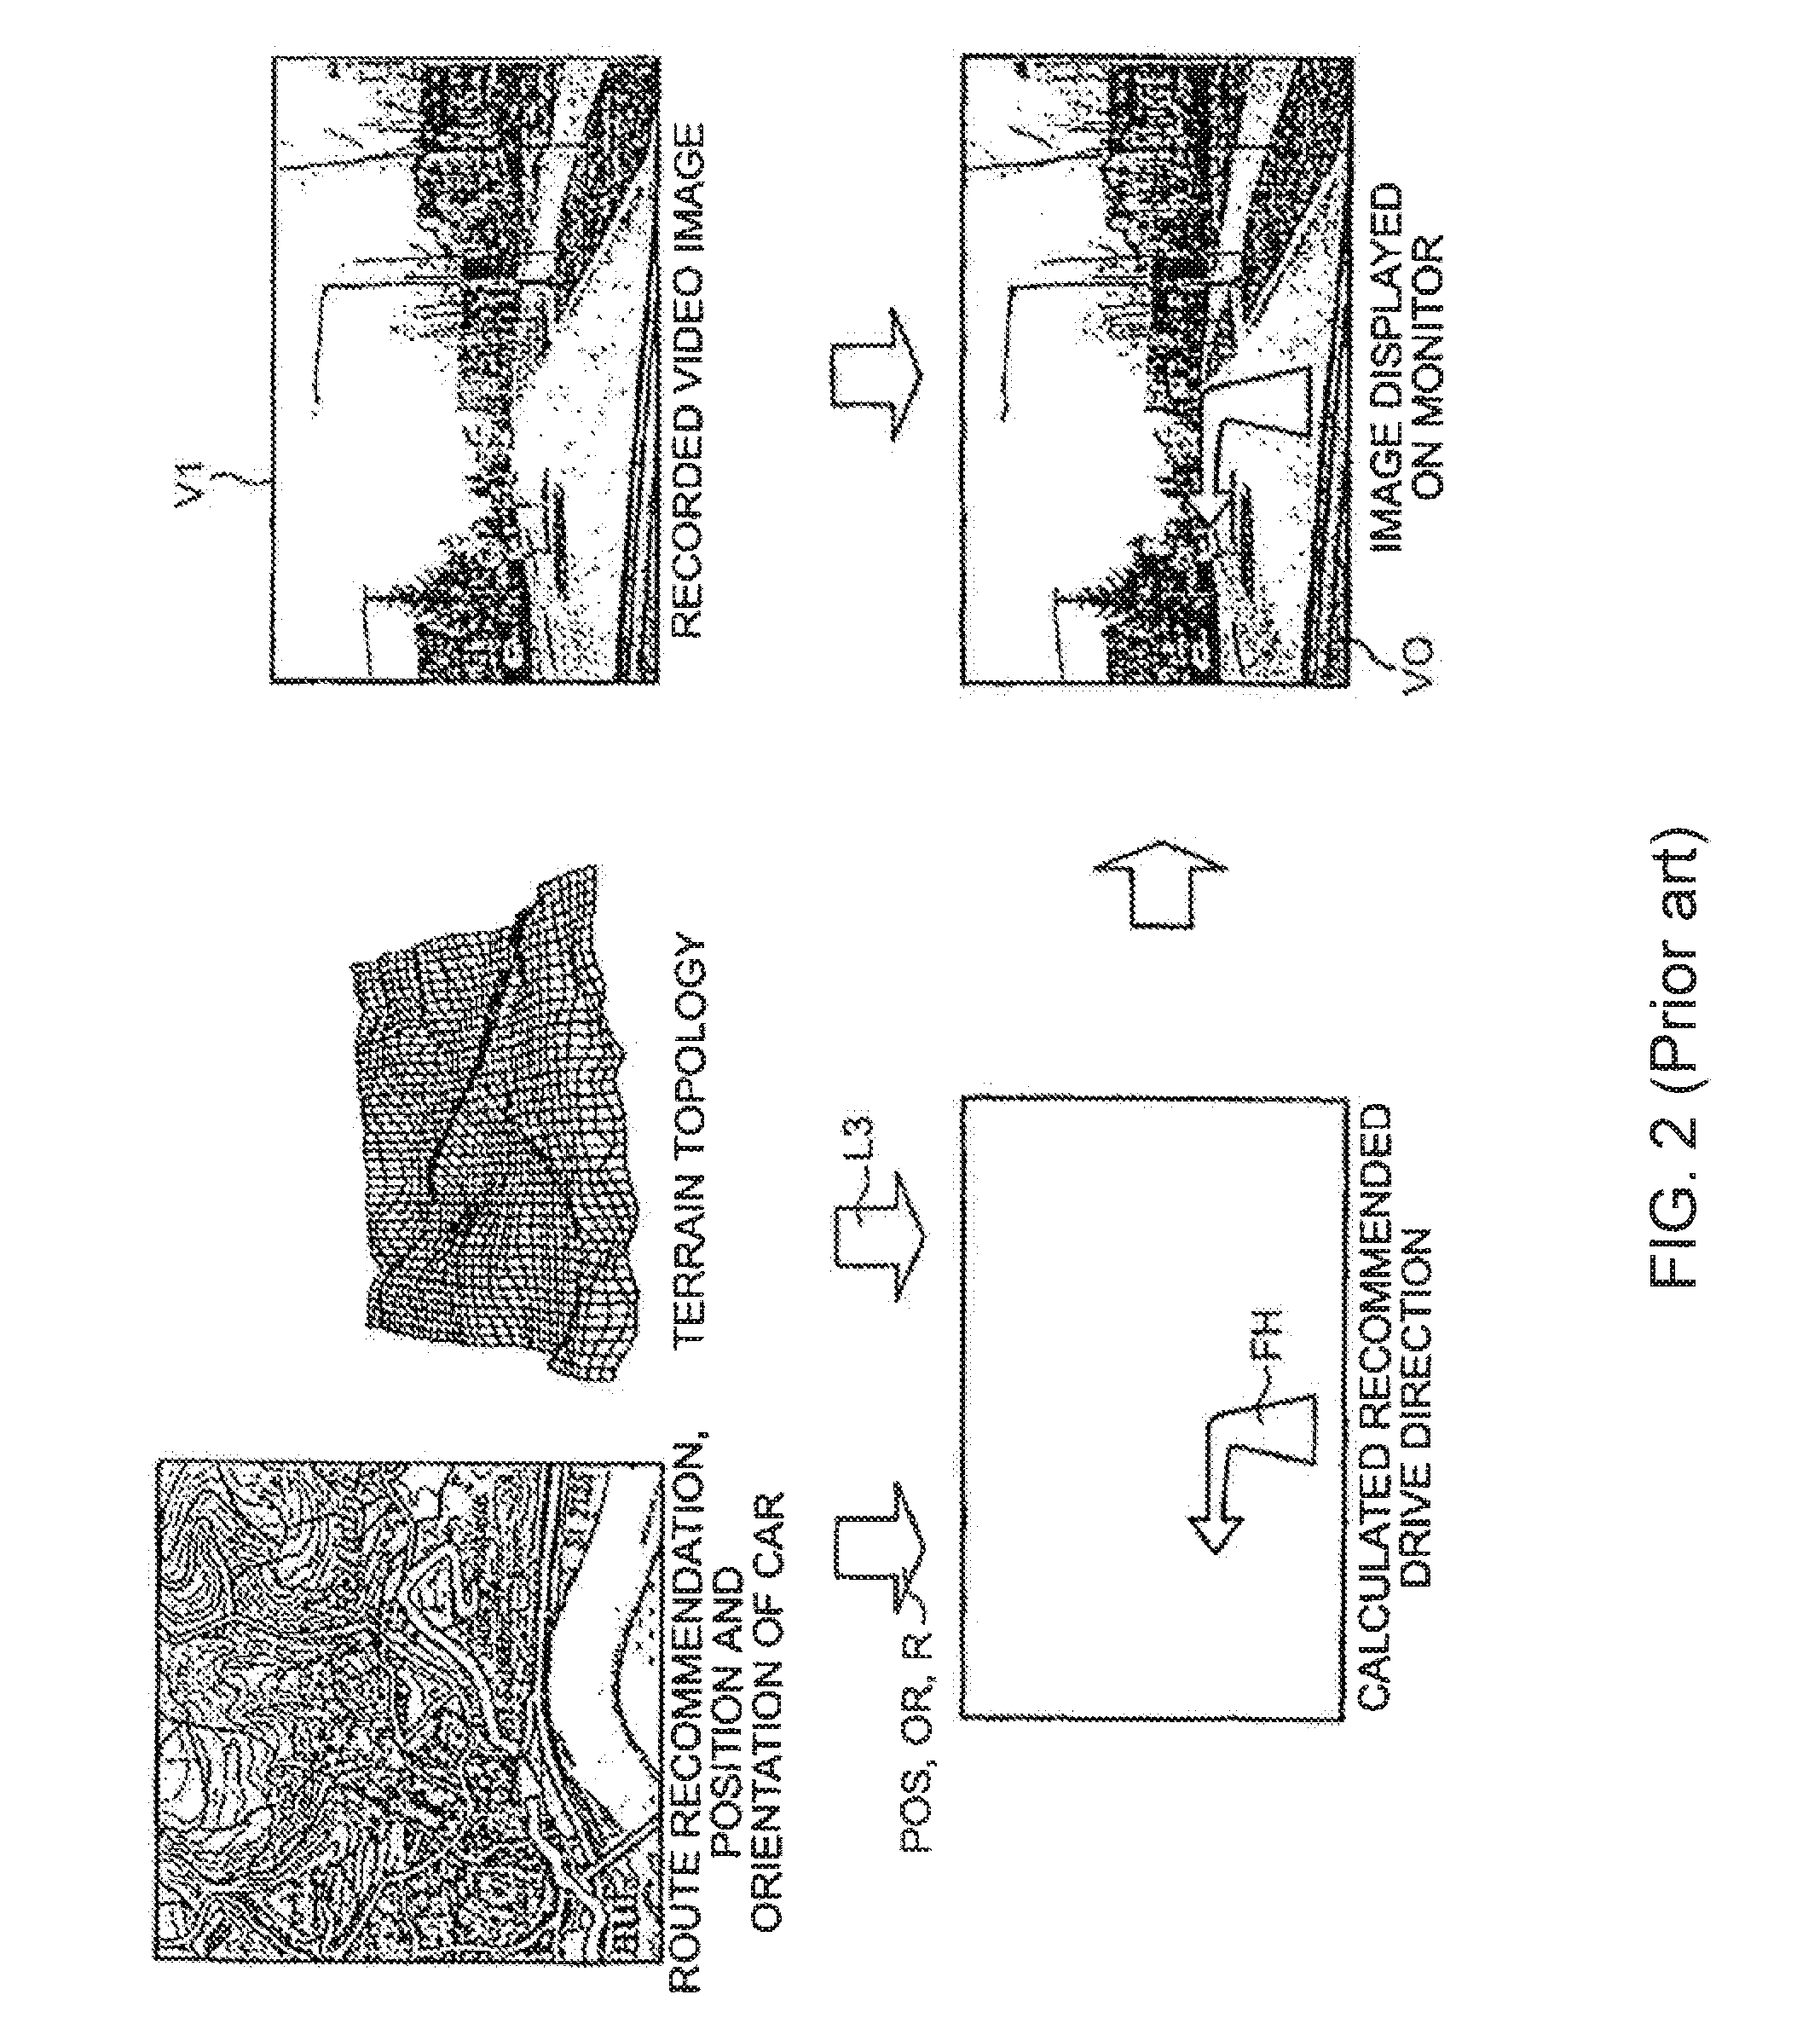 Method and Apparatus for Displaying Three-Dimensional Terrain and Route Guidance